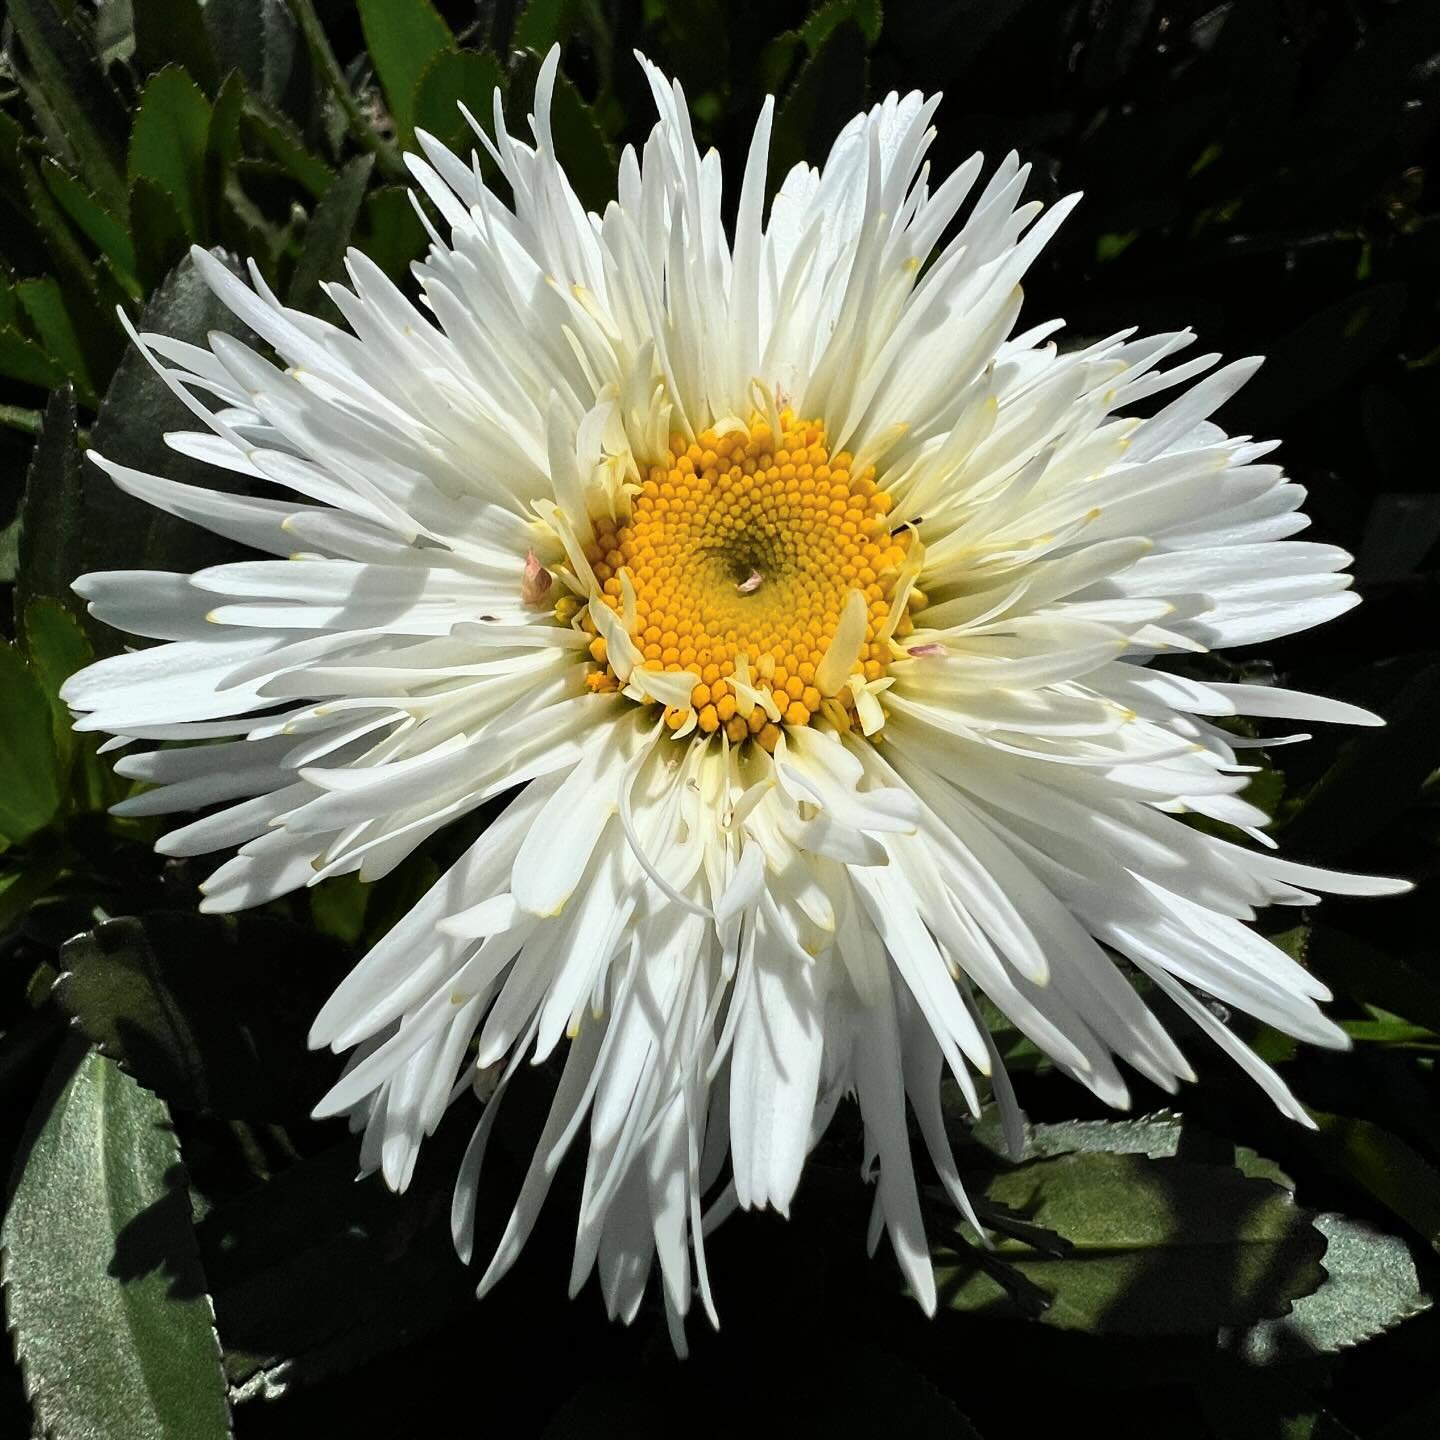 Chrysanthemum &lsquo;Rebecca&rsquo; 🌼 Great for borders, containers, rock gardens, or cut flowers. A crowd pleaser - who wouldn&rsquo;t love these bright, feathery white petals? 💕

#capitolwholesalenursery #nowblooming #springflowers #longblooming